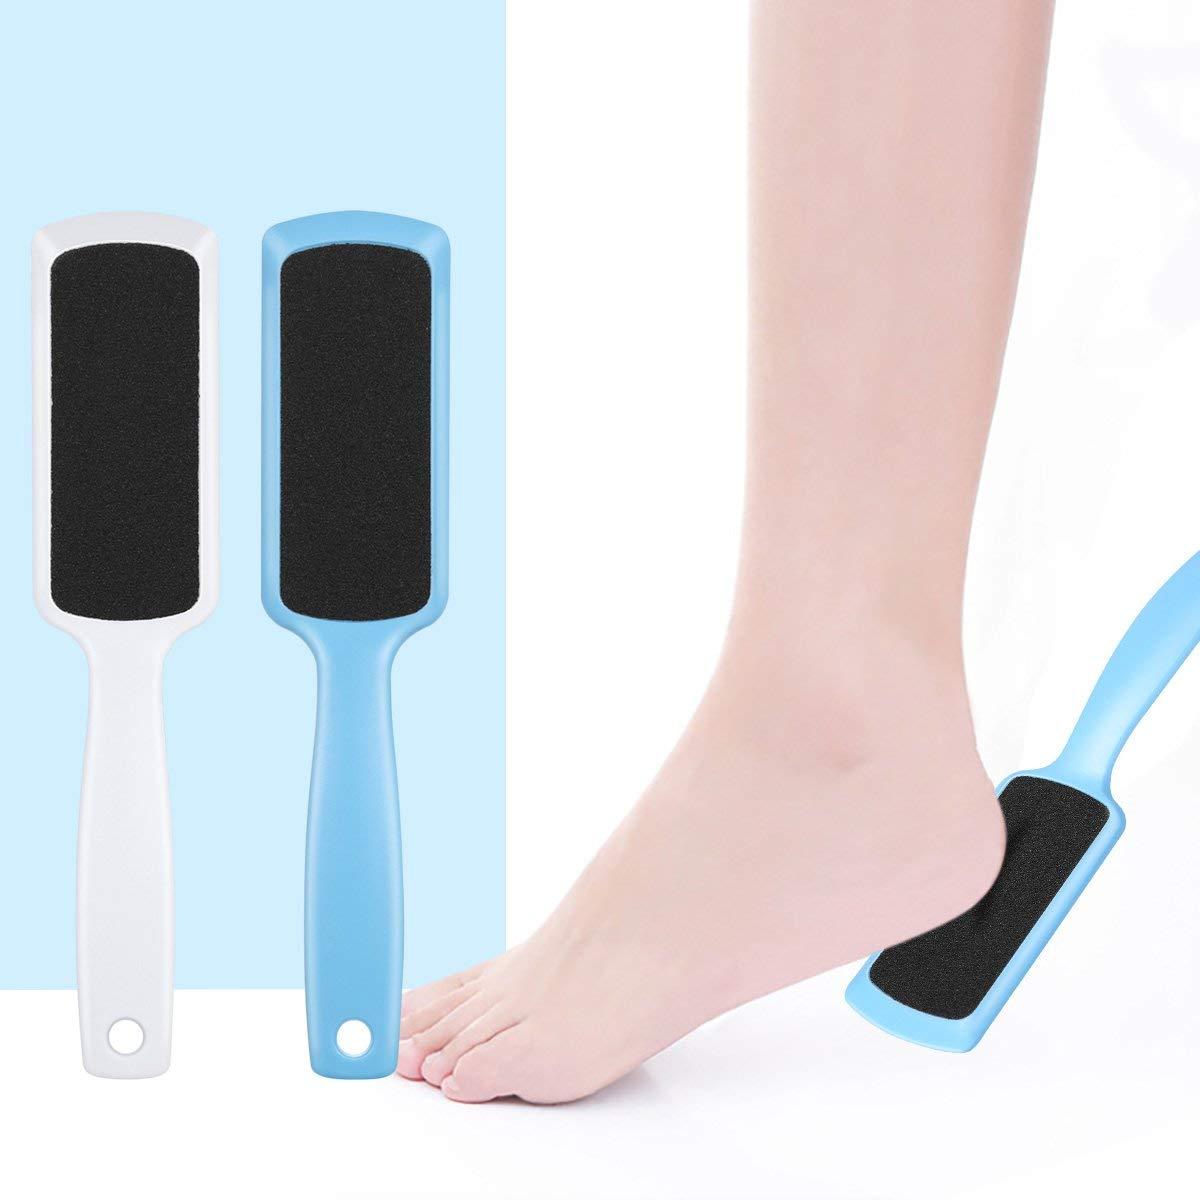 Pedicure Foot Scrubber Callus Remover - Colossal Foot File BTArtbox Large  Foot Rasp Stainless Steel Grater Foot Care Pedicure Tools for Wet and Dry